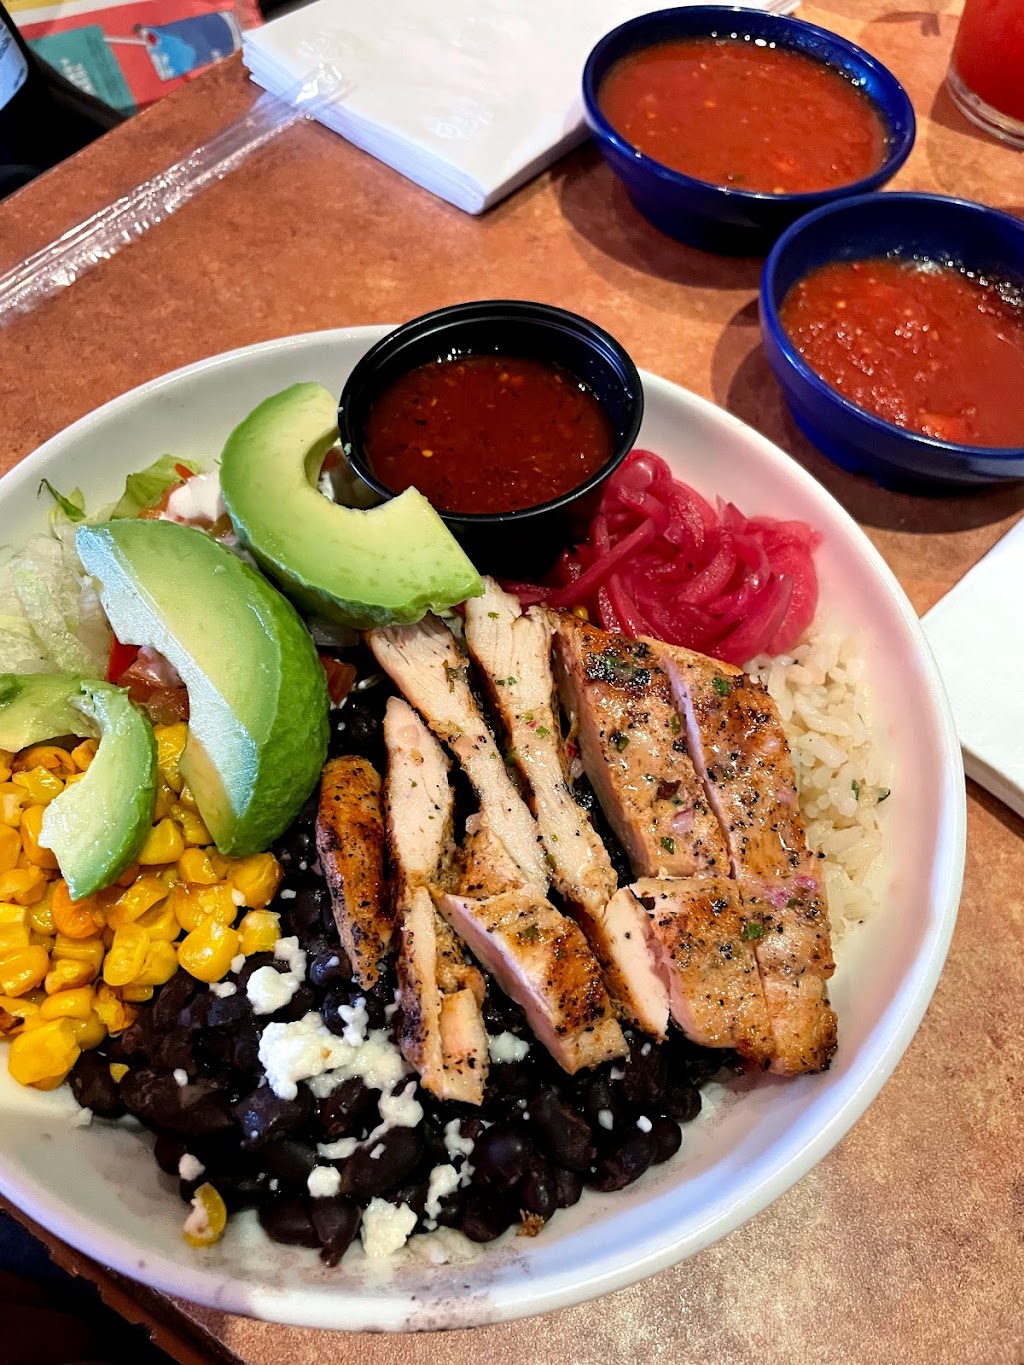 On The Border Mexican Grill & Cantina | 5960 W Parker Rd Suite 210, Plano, TX 75093, USA | Phone: (972) 372-0070